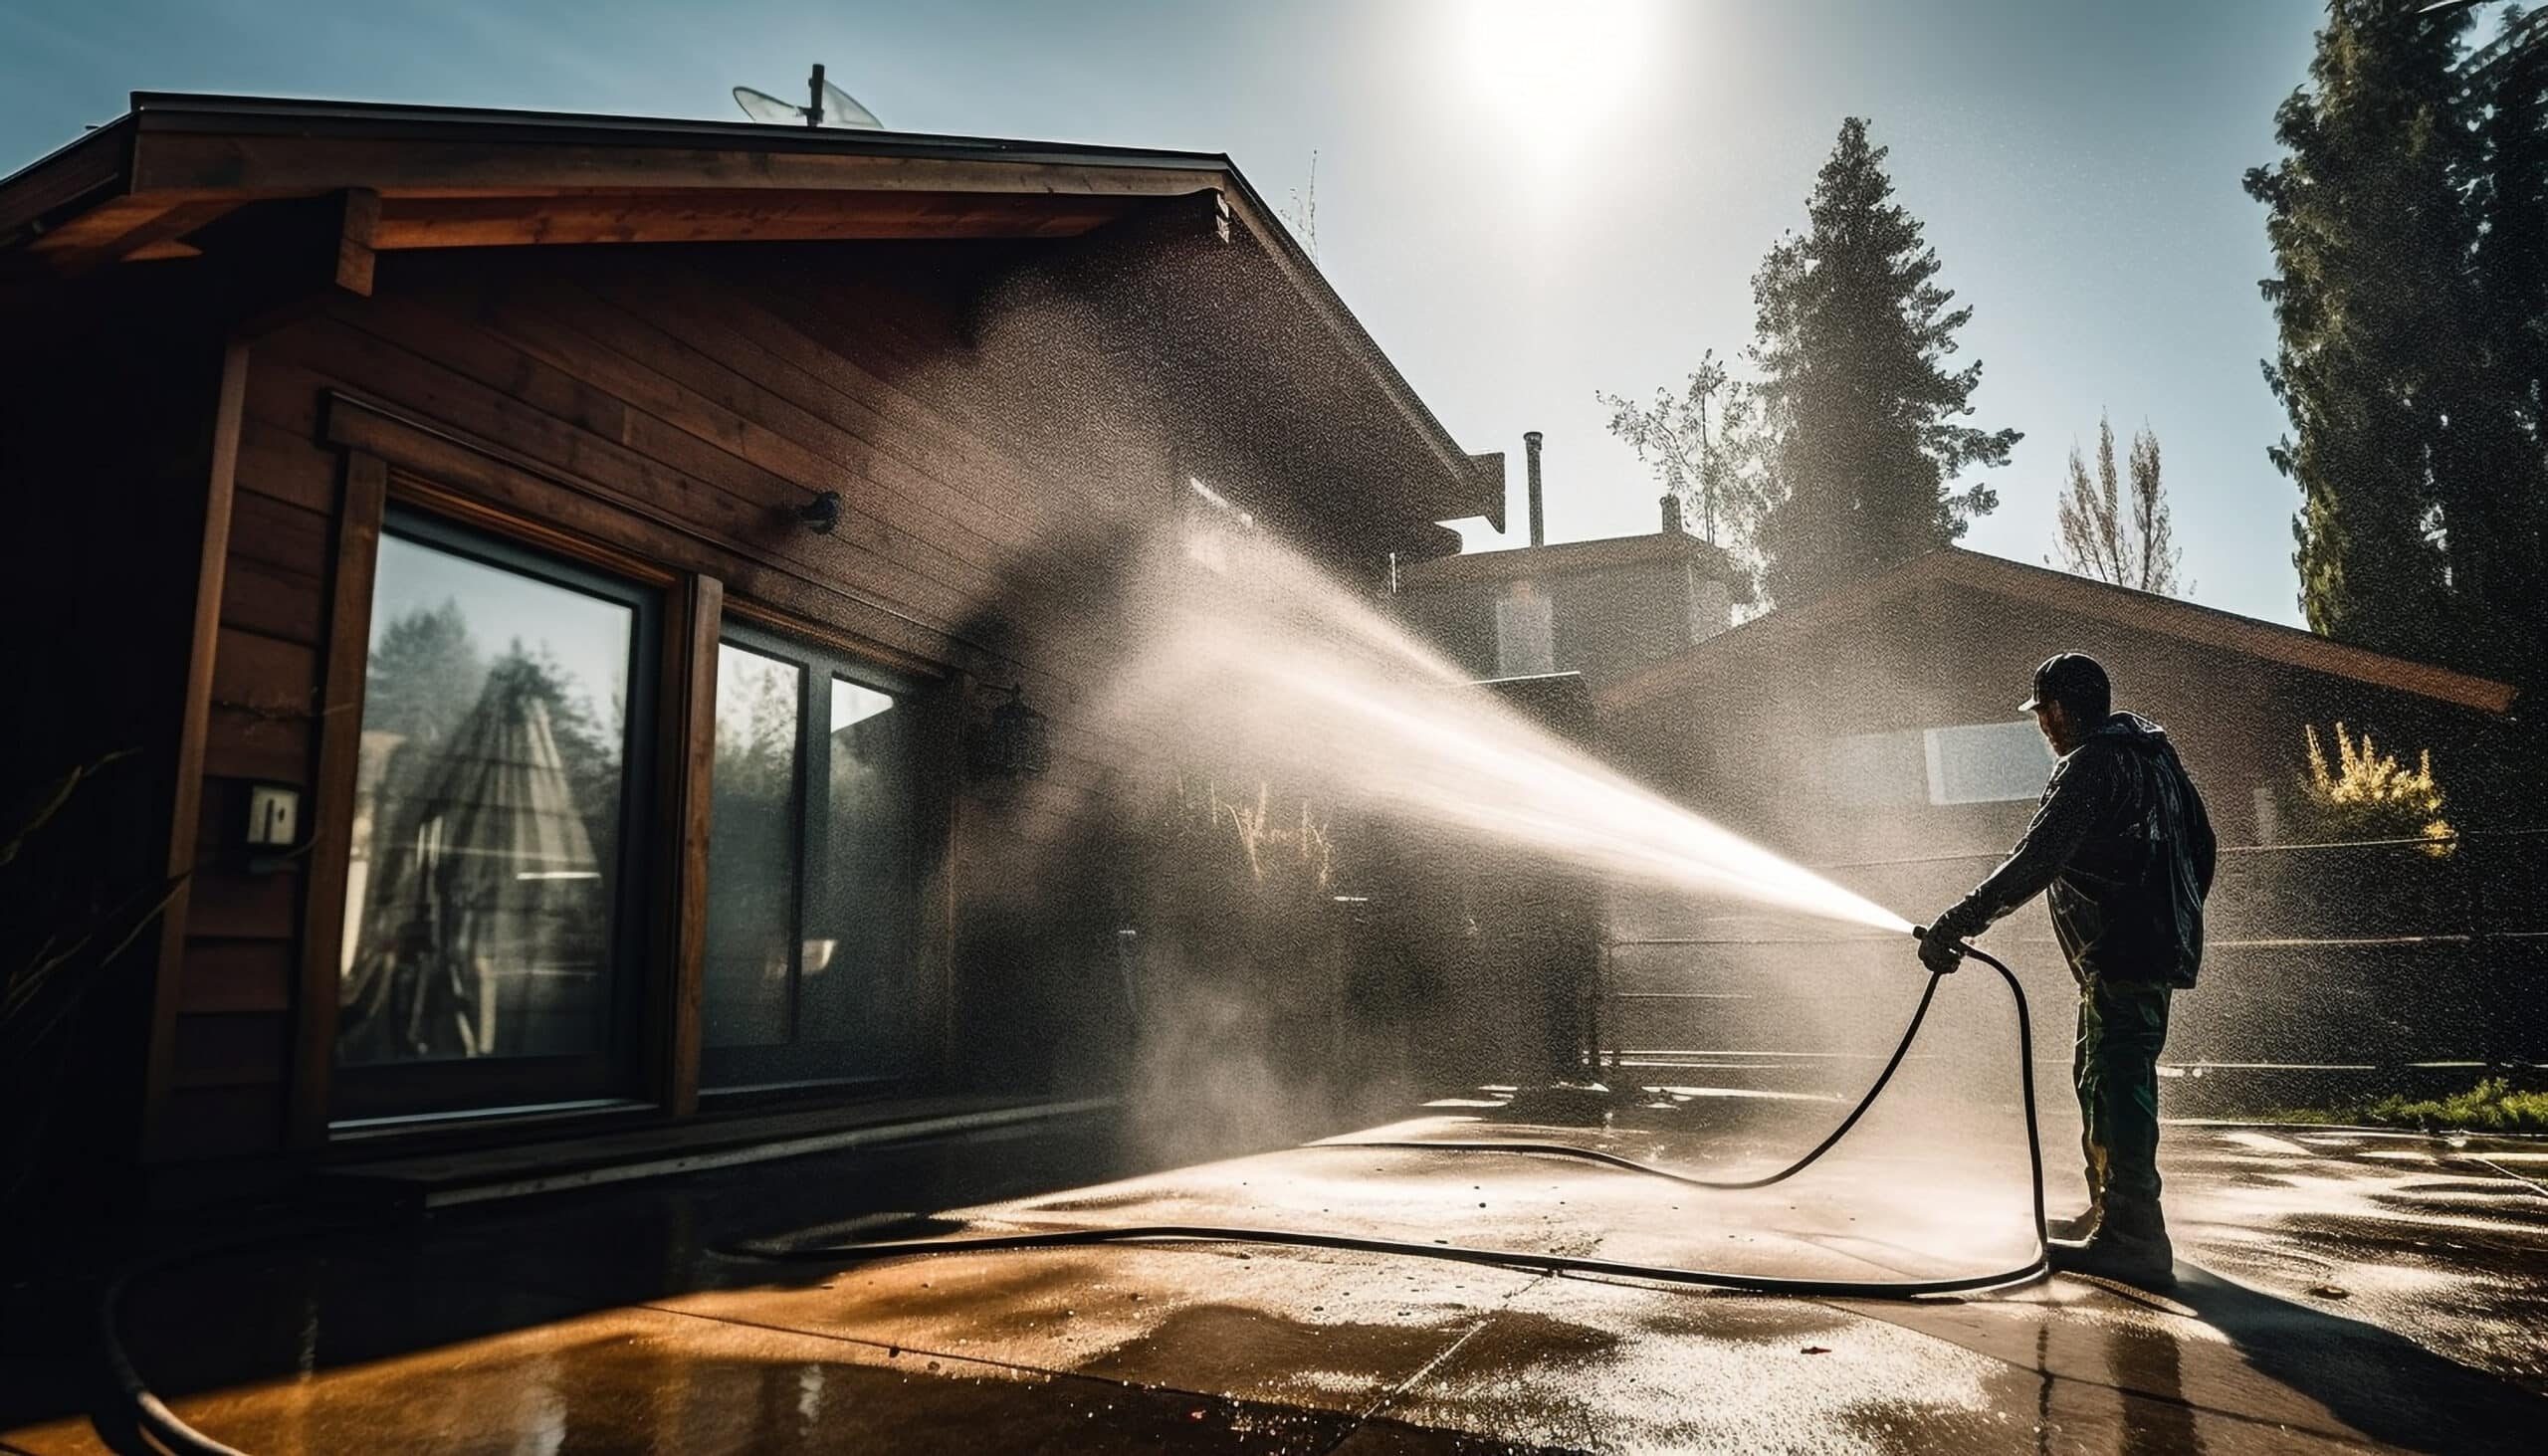 www.appr.com : Can I use hot water with a gasoline-powered pressure washer?